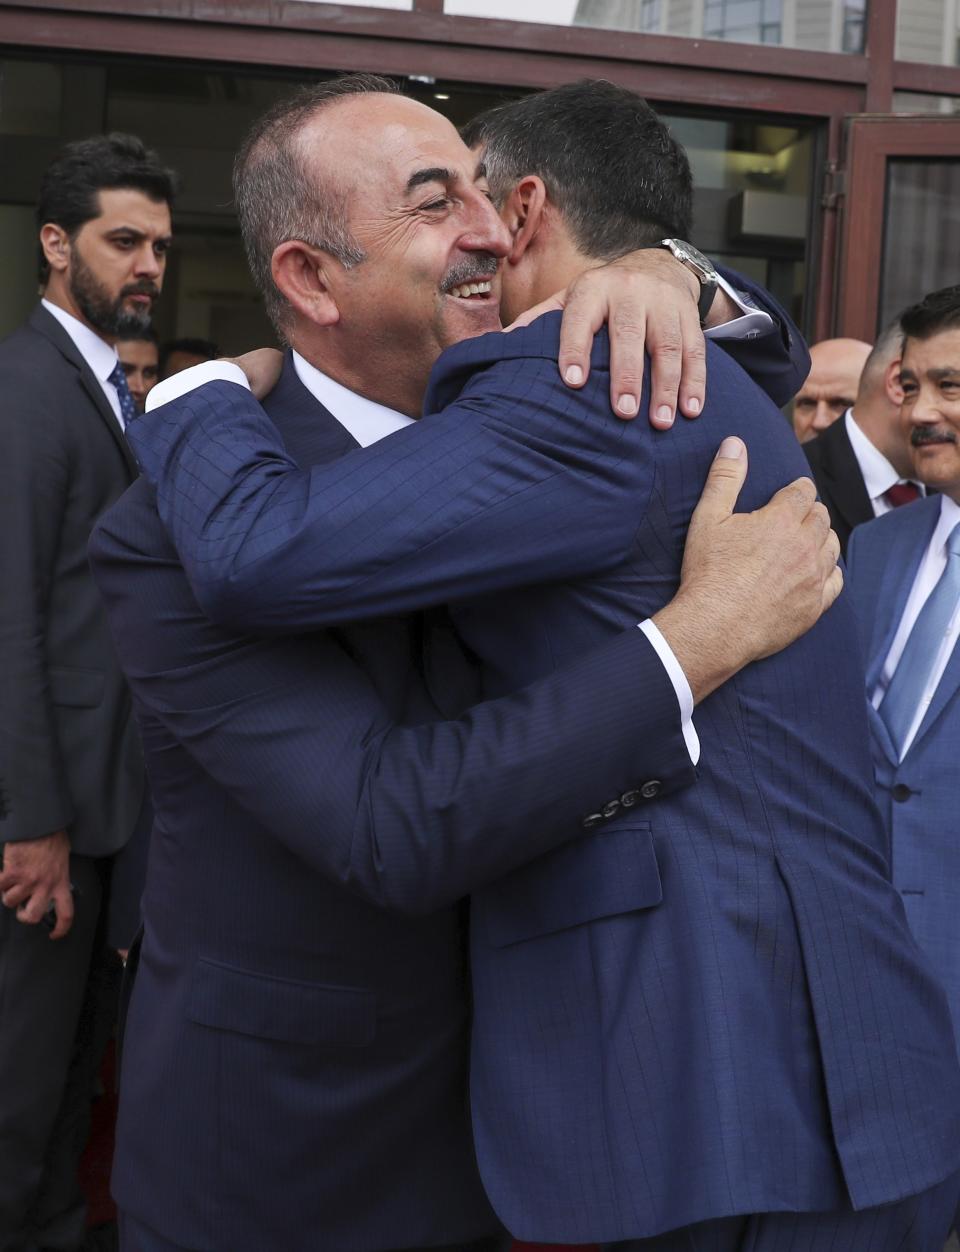 Turkey's Foreign Minister Mevlut Cavusoglu, left, embraces North Macedonia's Foreign Minister Nikola Dimitrov, right, prior to their meeting, in Skopje, North Macedonia, Tuesday, July 16, 2019. Cavusoglu on Tuesday downplayed as "worthless" an initial set of sanctions approved by the European Union against Ankara and vowed to send a new vessel to the eastern Mediterranean to reinforce its efforts to drill for hydrocarbons off the island of Cyprus. EU foreign ministers on Monday approved sanctions against Turkey over its drilling for gas in waters where EU member Cyprus has exclusive economic rights. (Cem Ozdel/Turkish Foreign Ministry via AP, Pool)